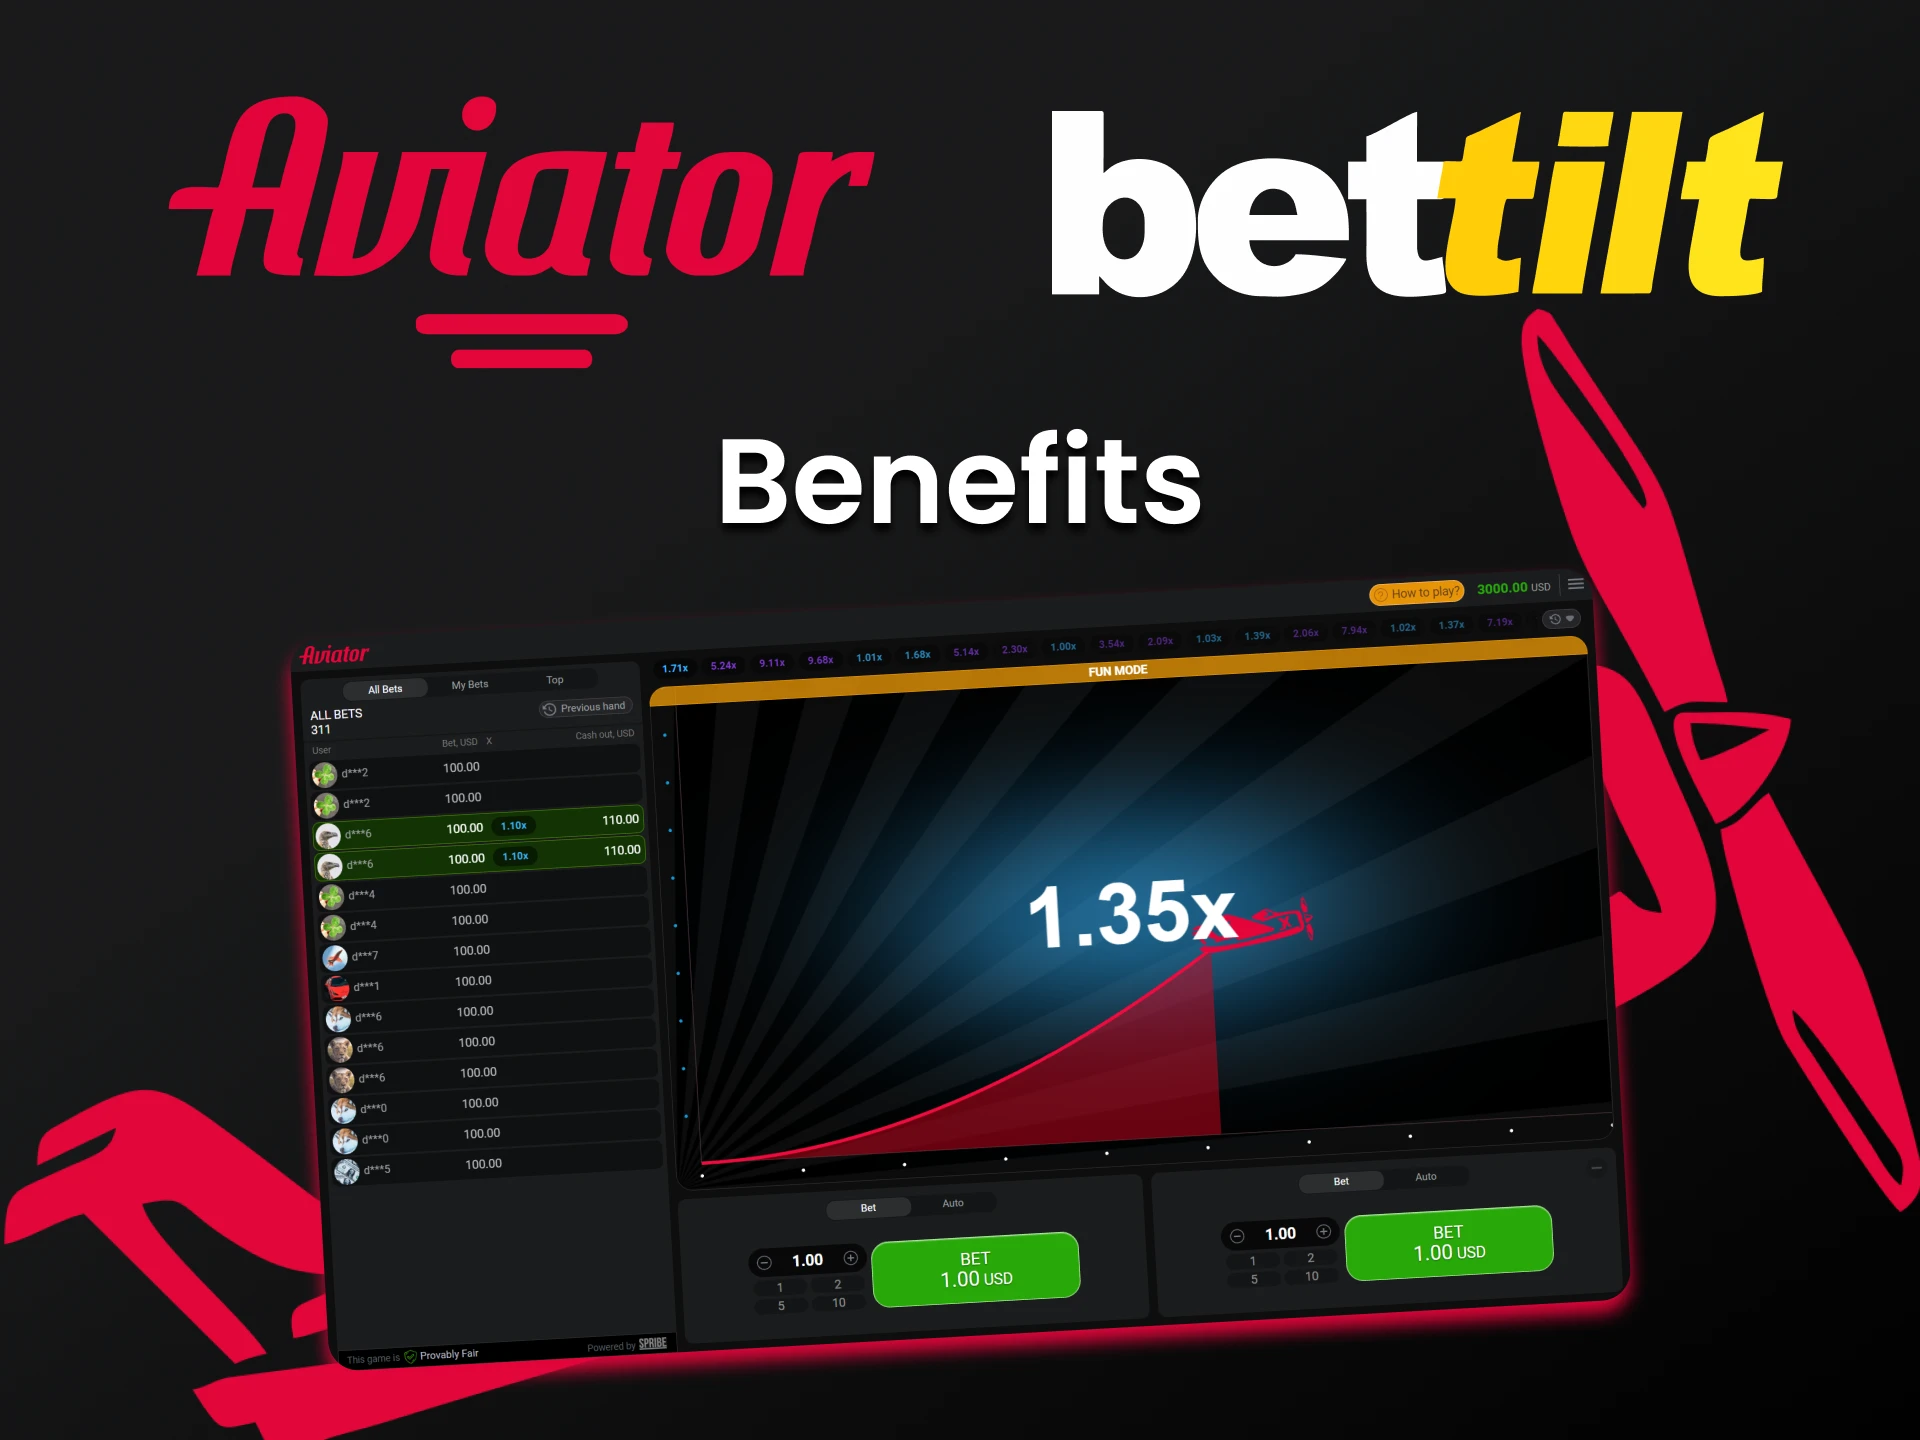 The Bettilt service has many advantages for playing Aviator.